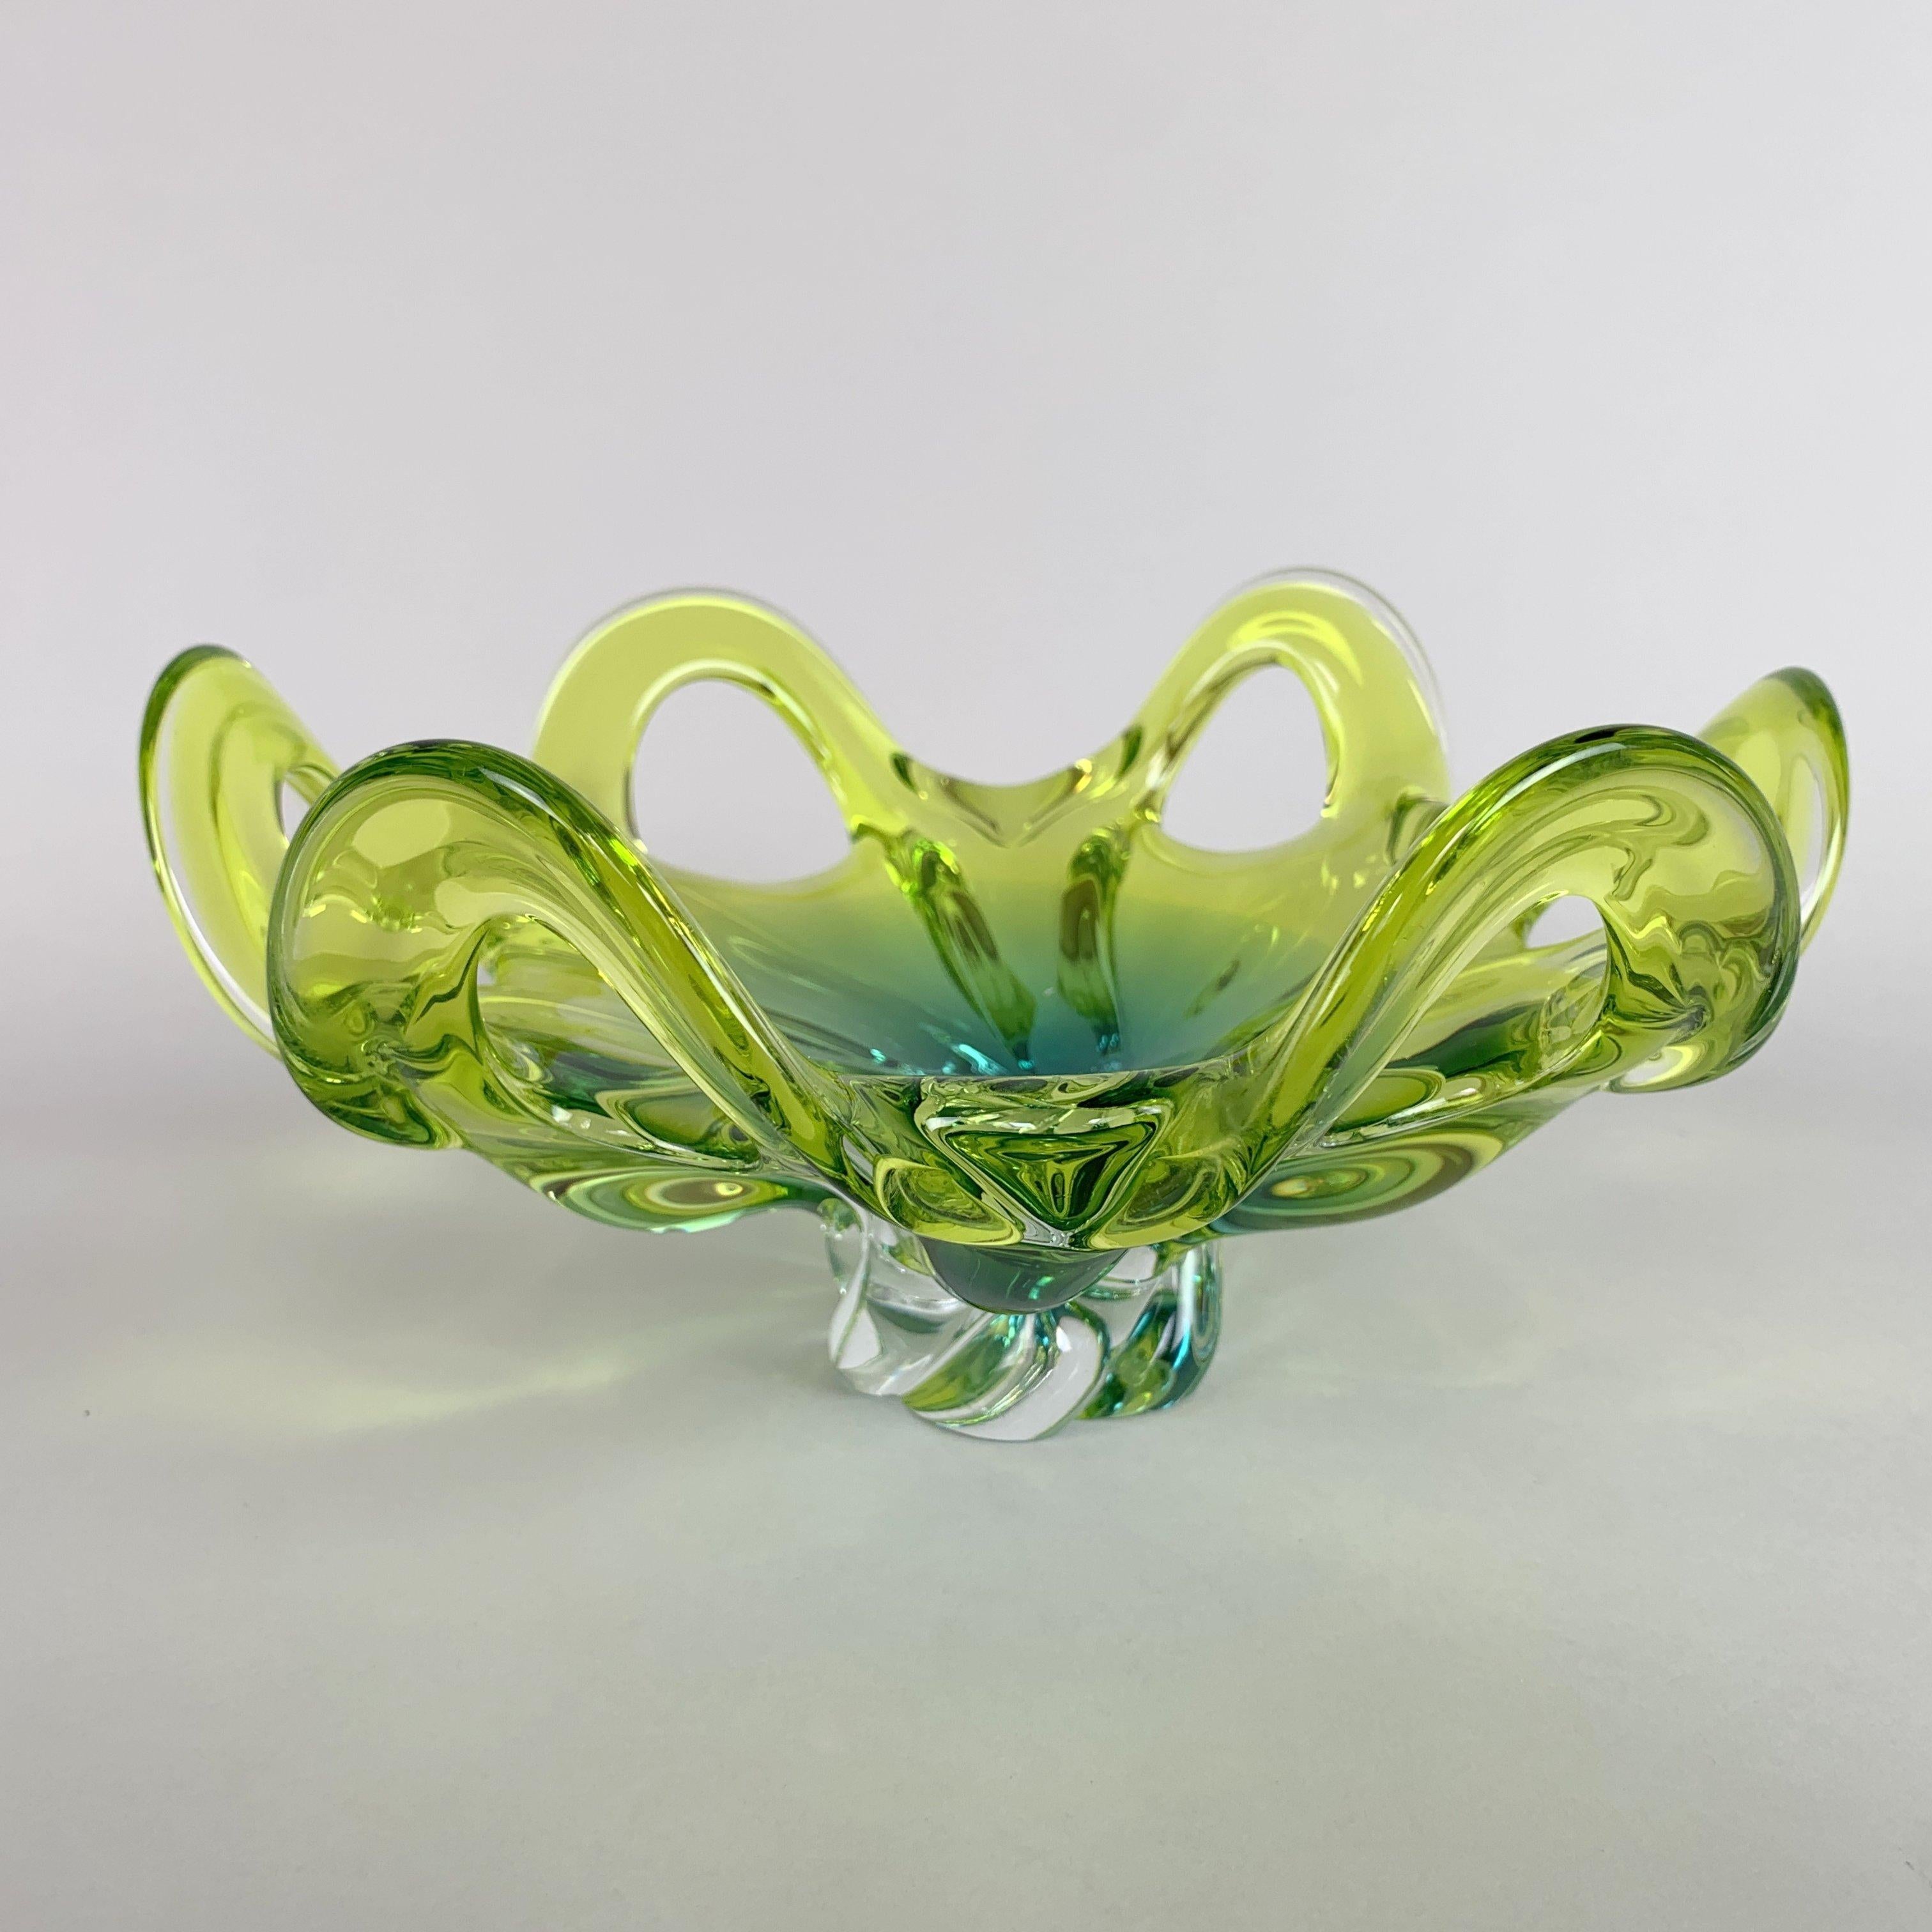 Heavy glass bowl designed by Josef Hospodka in the 1960s and manufactured by Chribska glassworks in Czechoslovakia.

The bowl is approximately 12.5 cm (4.92 inch) high and 26 cm (10.24 inch) wide across the widest point. It weights about 1.97 kg